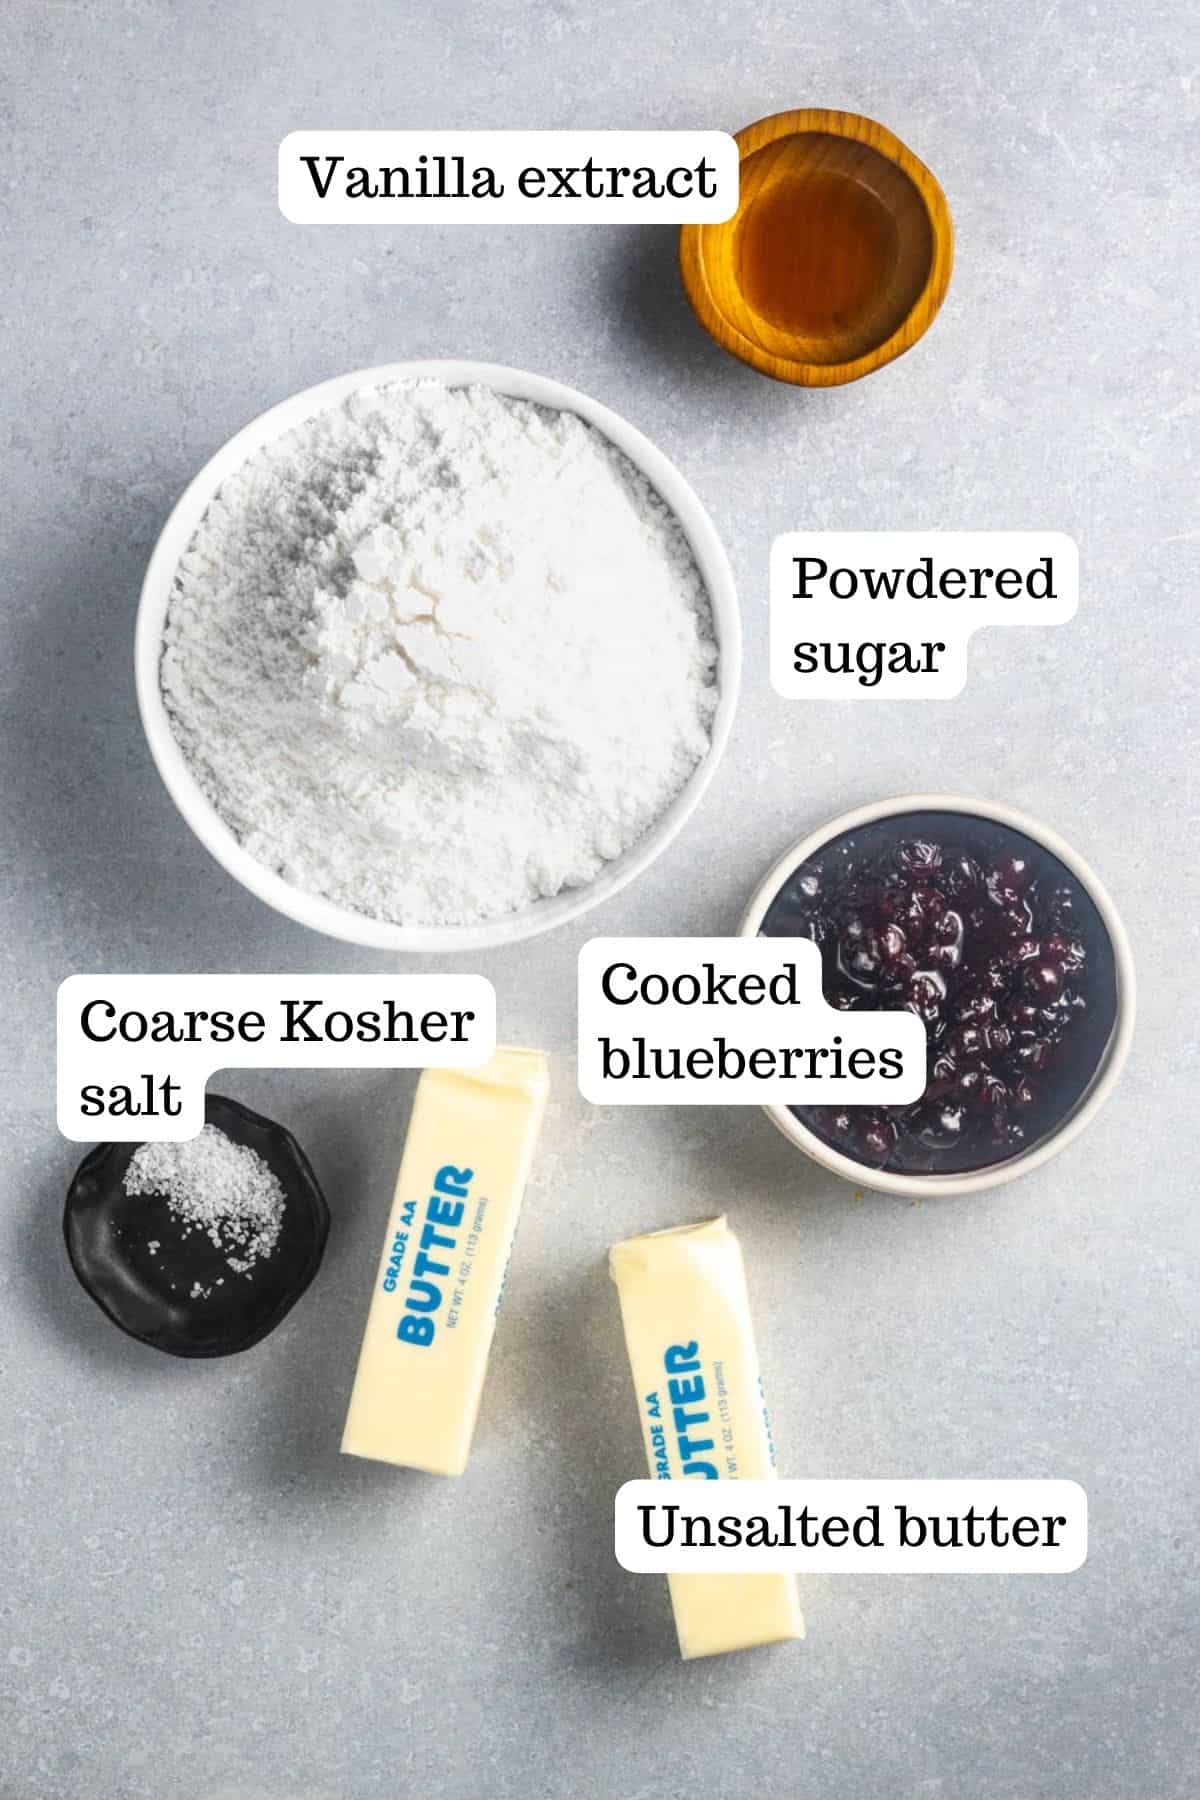 Ingredients for blueberry frosting. In the photo there are bowls of vanilla extract, powdered sugar, cooked blueberries, and kosher salt, along with 2 sticks of unsalted butter.